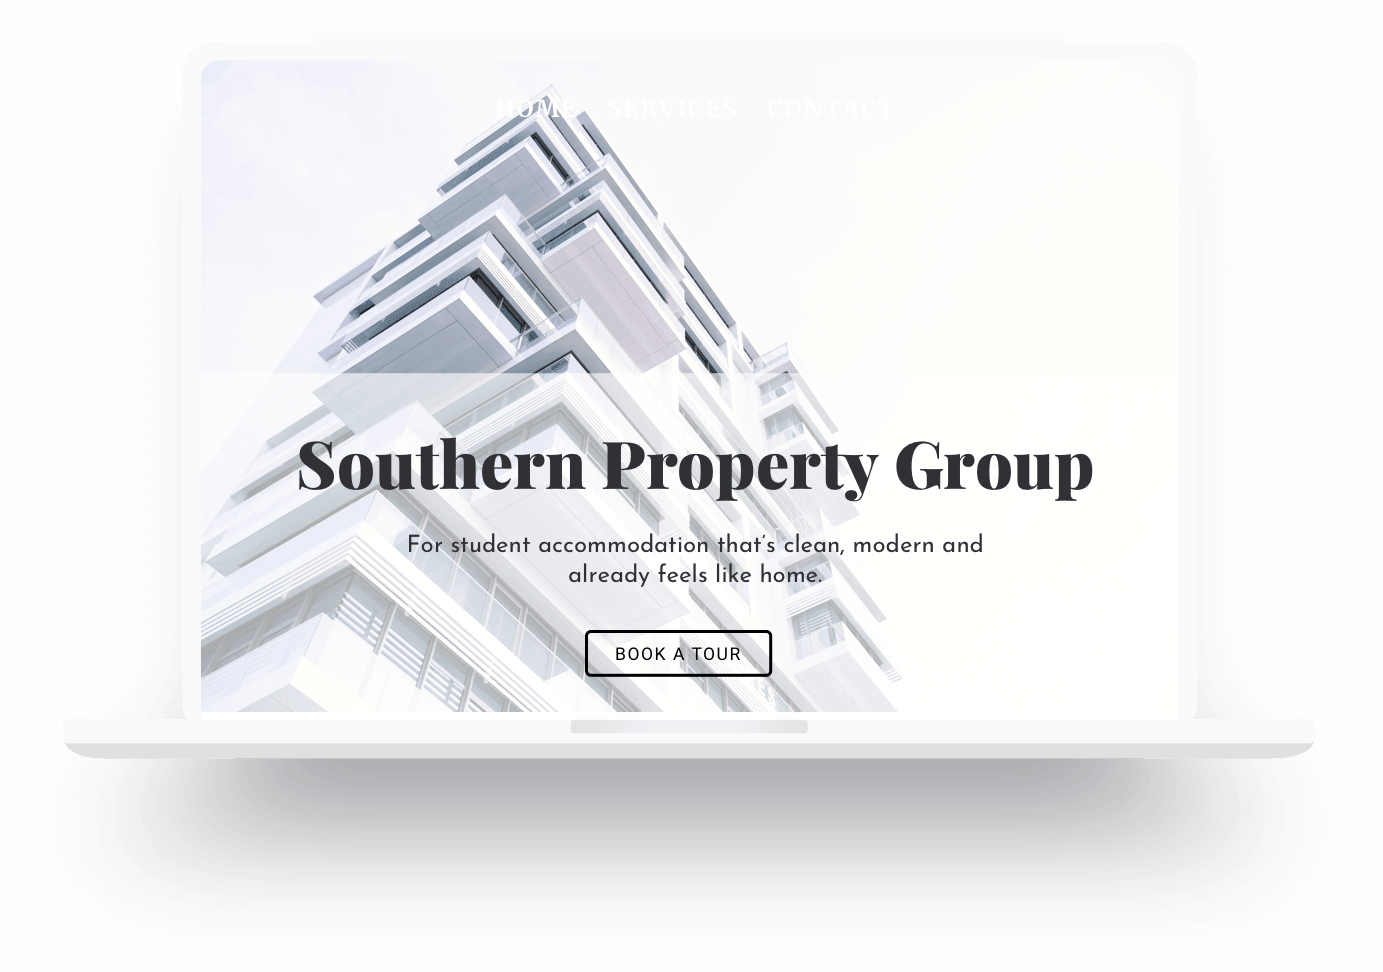 Example of a property group website built with Jimdo